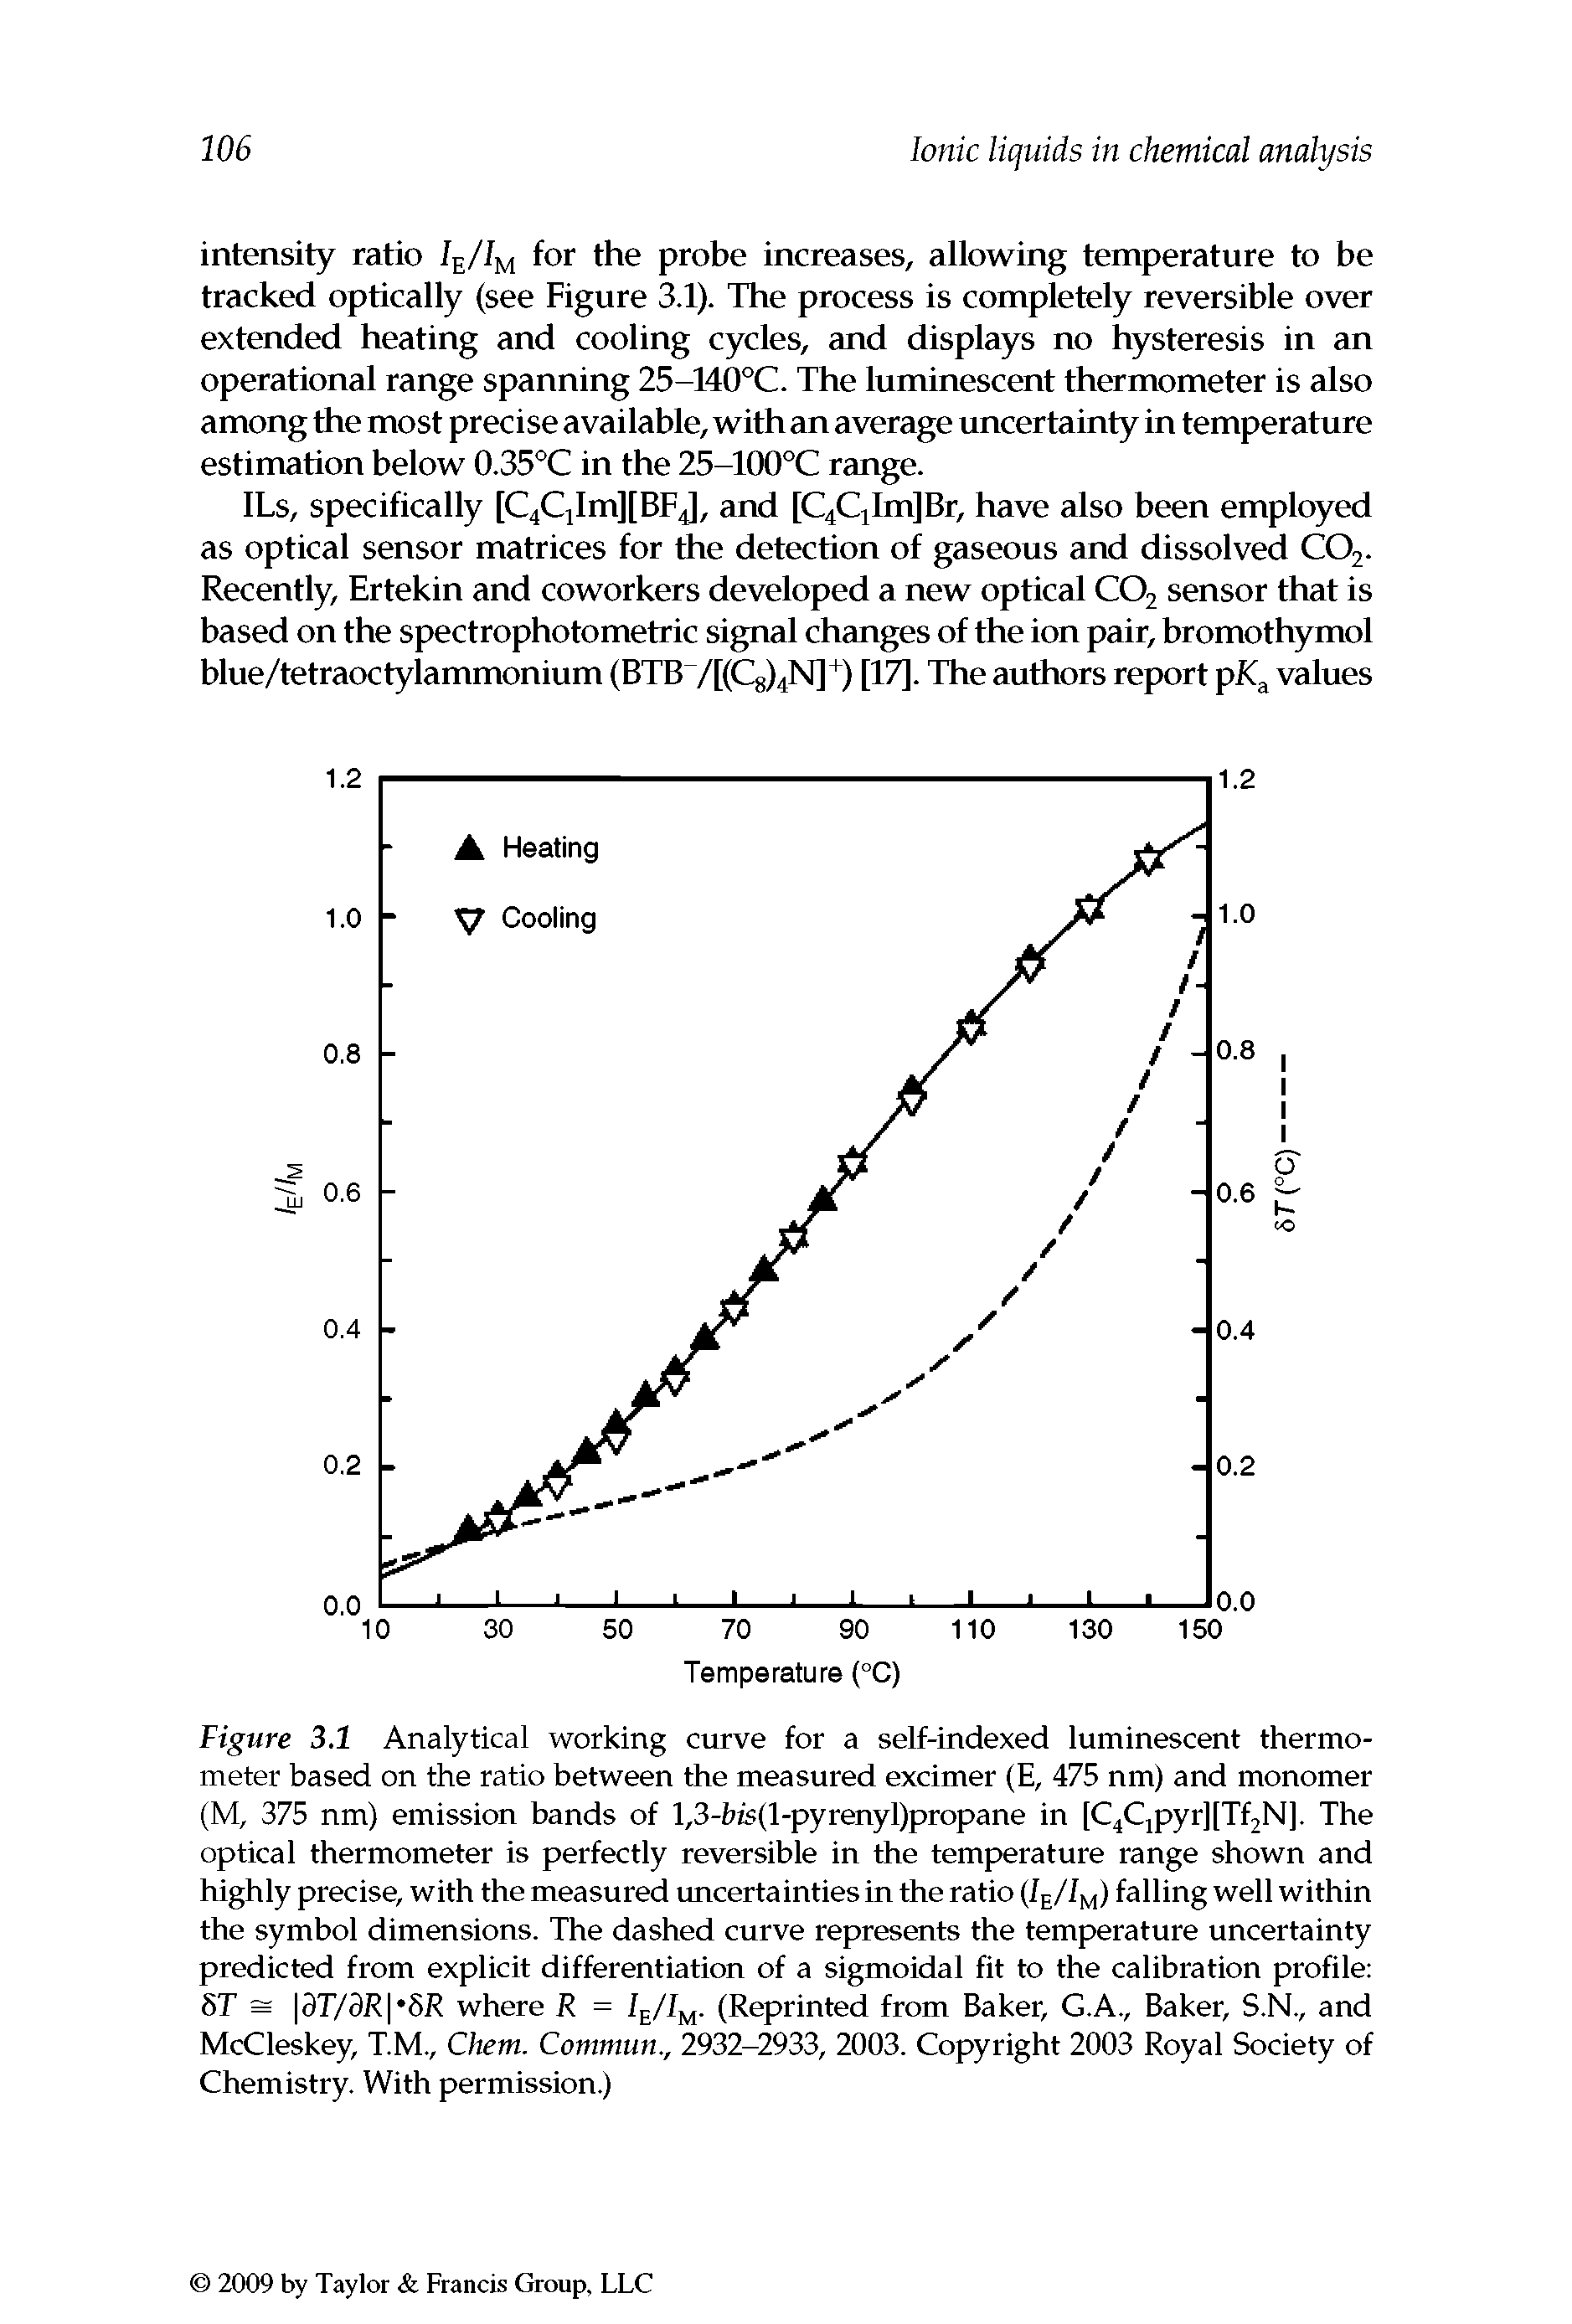 Figure 3.1 Analytical working curve for a self-indexed luminescent thermometer based on the ratio between the measured excimer (E, 475 nm) and monomer (M, 375 nm) emission bands of l,3-b/s(l-pyrenyl)propane in [C4Cjpyr][Tf2Nj. The optical thermometer is perfectly reversible in the temperature range shown and highly precise, with the measured uncertainties in the ratio (1 /1 ) falling well within the symbol dimensions. The dashed curve represents the temperature uncertainty predicted from explicit differentiation of a sigmoidal fit to the calibration profile 5T = 0T/0R 5R where R = I /Iu- (Reprinted from Baker, G.A., Baker, S.N., and McCleskey, T.M., Chem. Commun., 2932-2933, 2003. Copyright 2003 Royal Society of Chemistry. With permission.)...